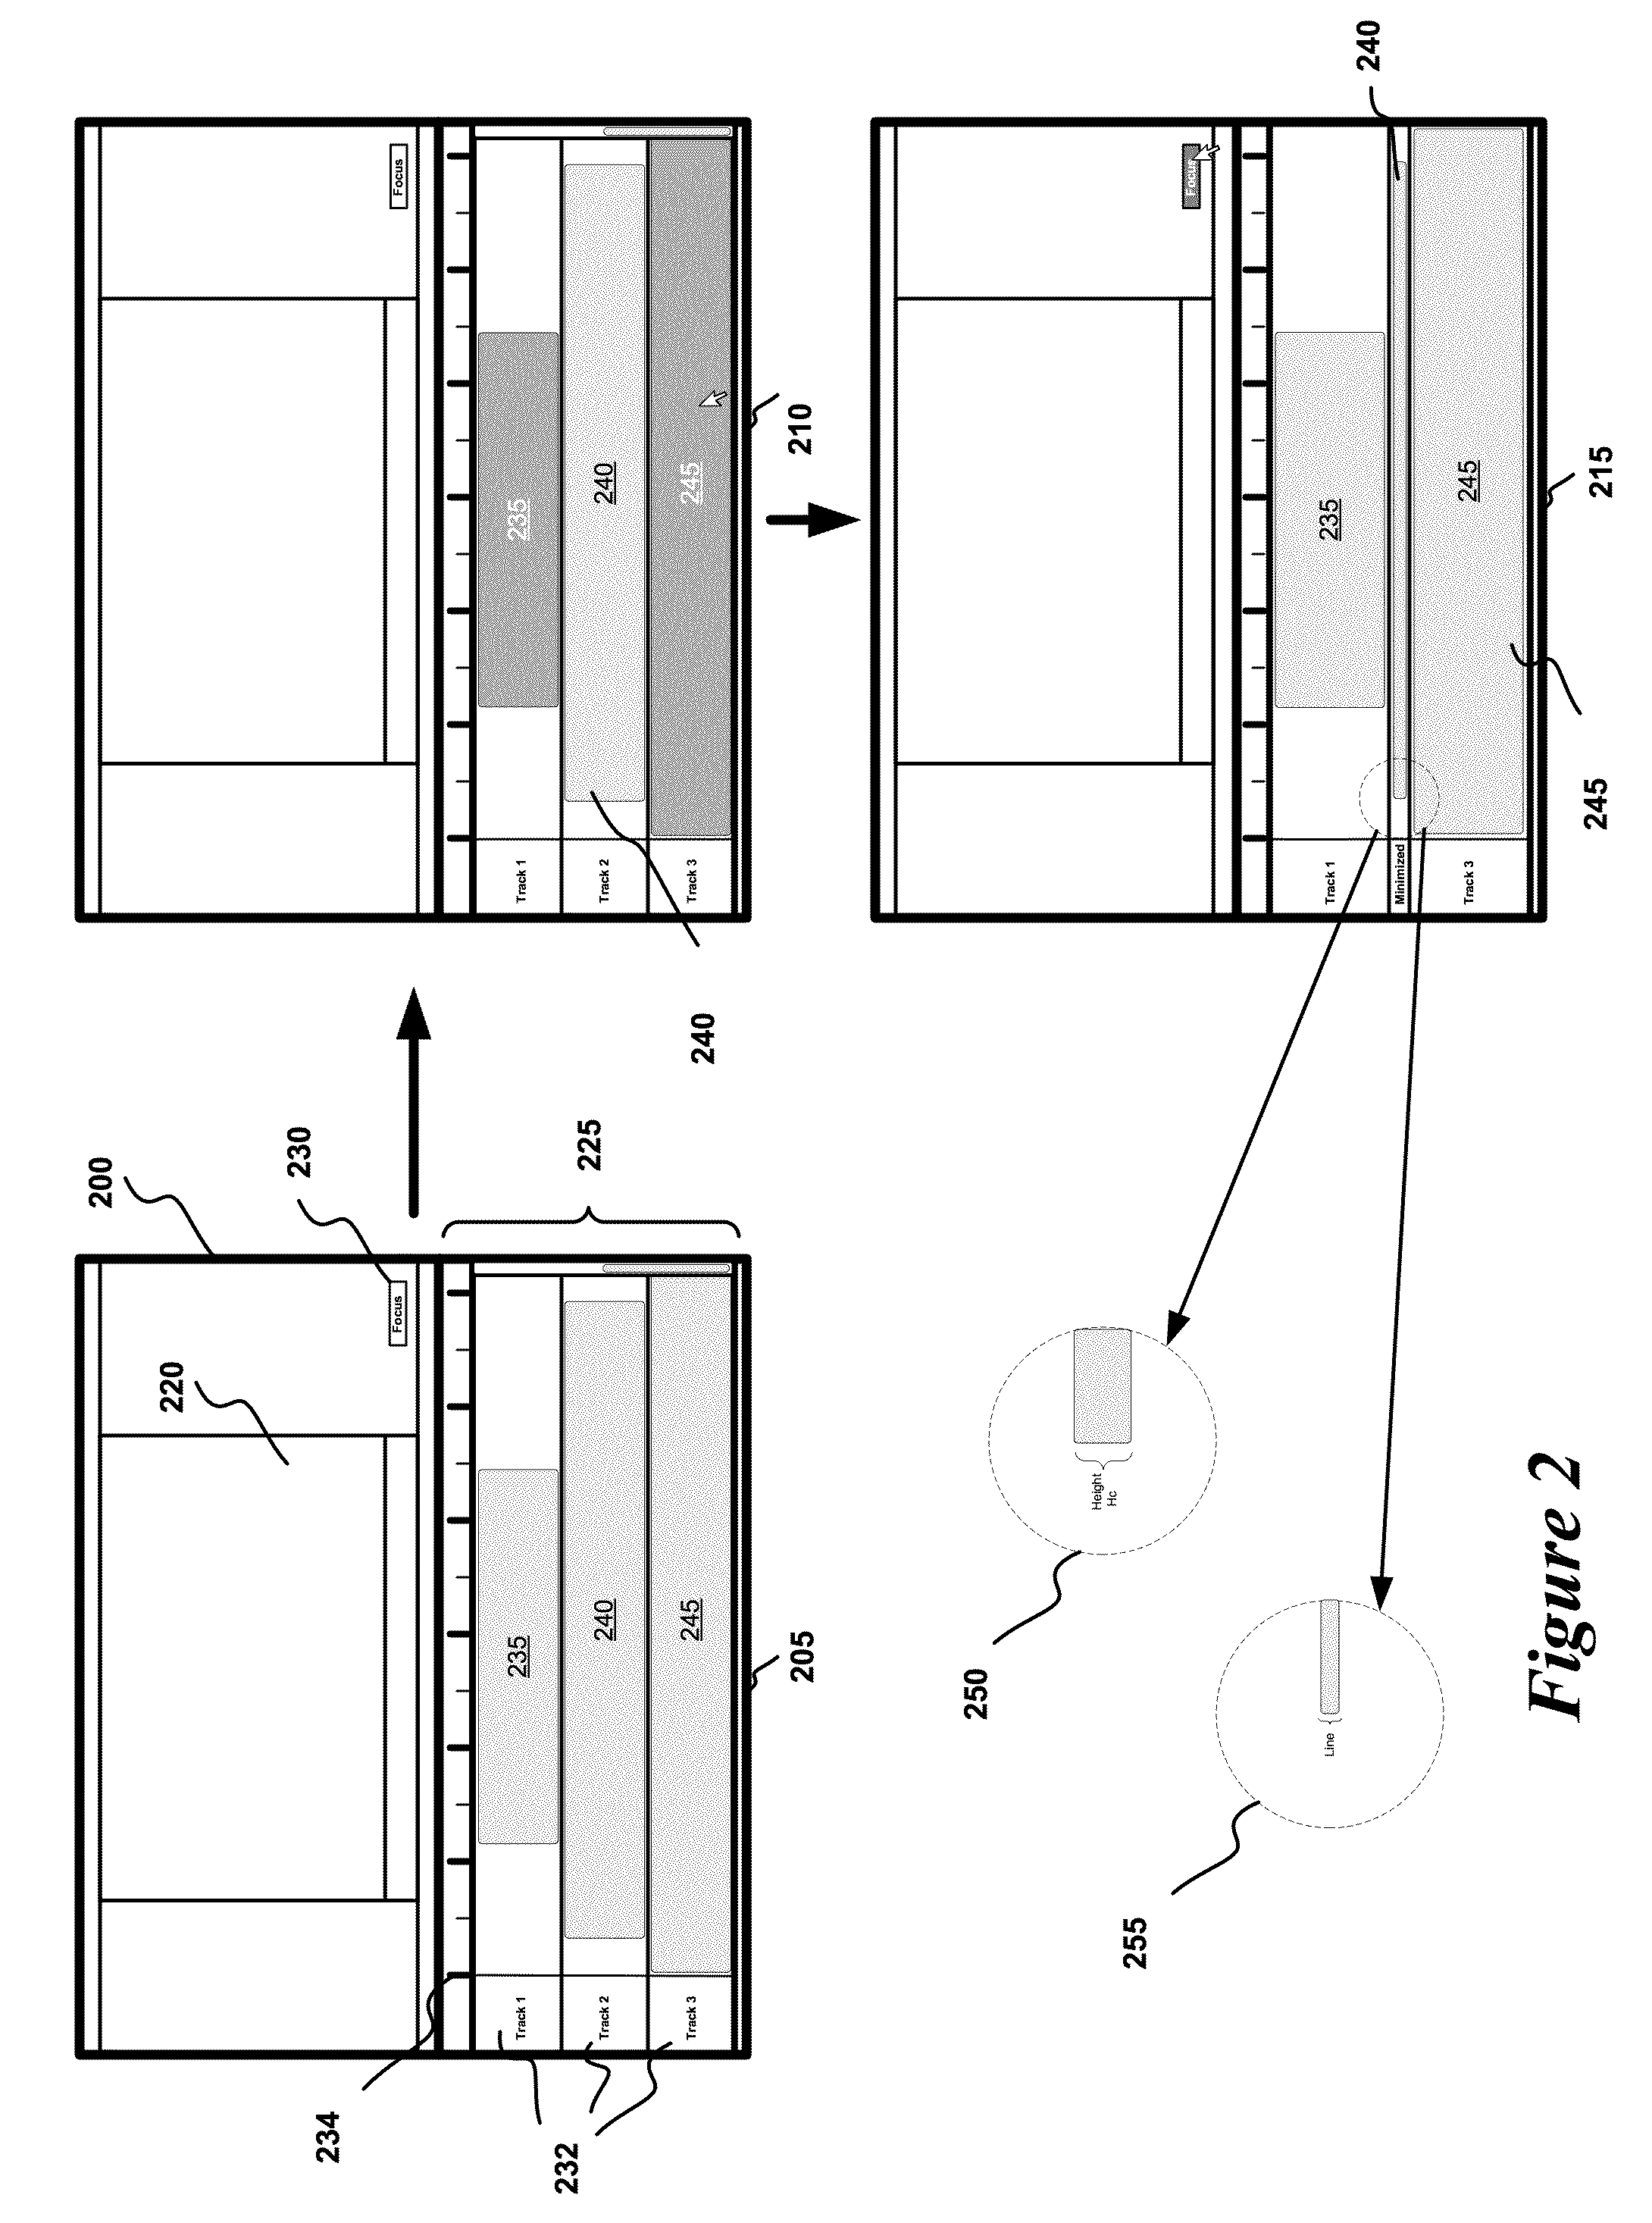 Media editing application with capability to focus on graphical composite elements in a media compositing area